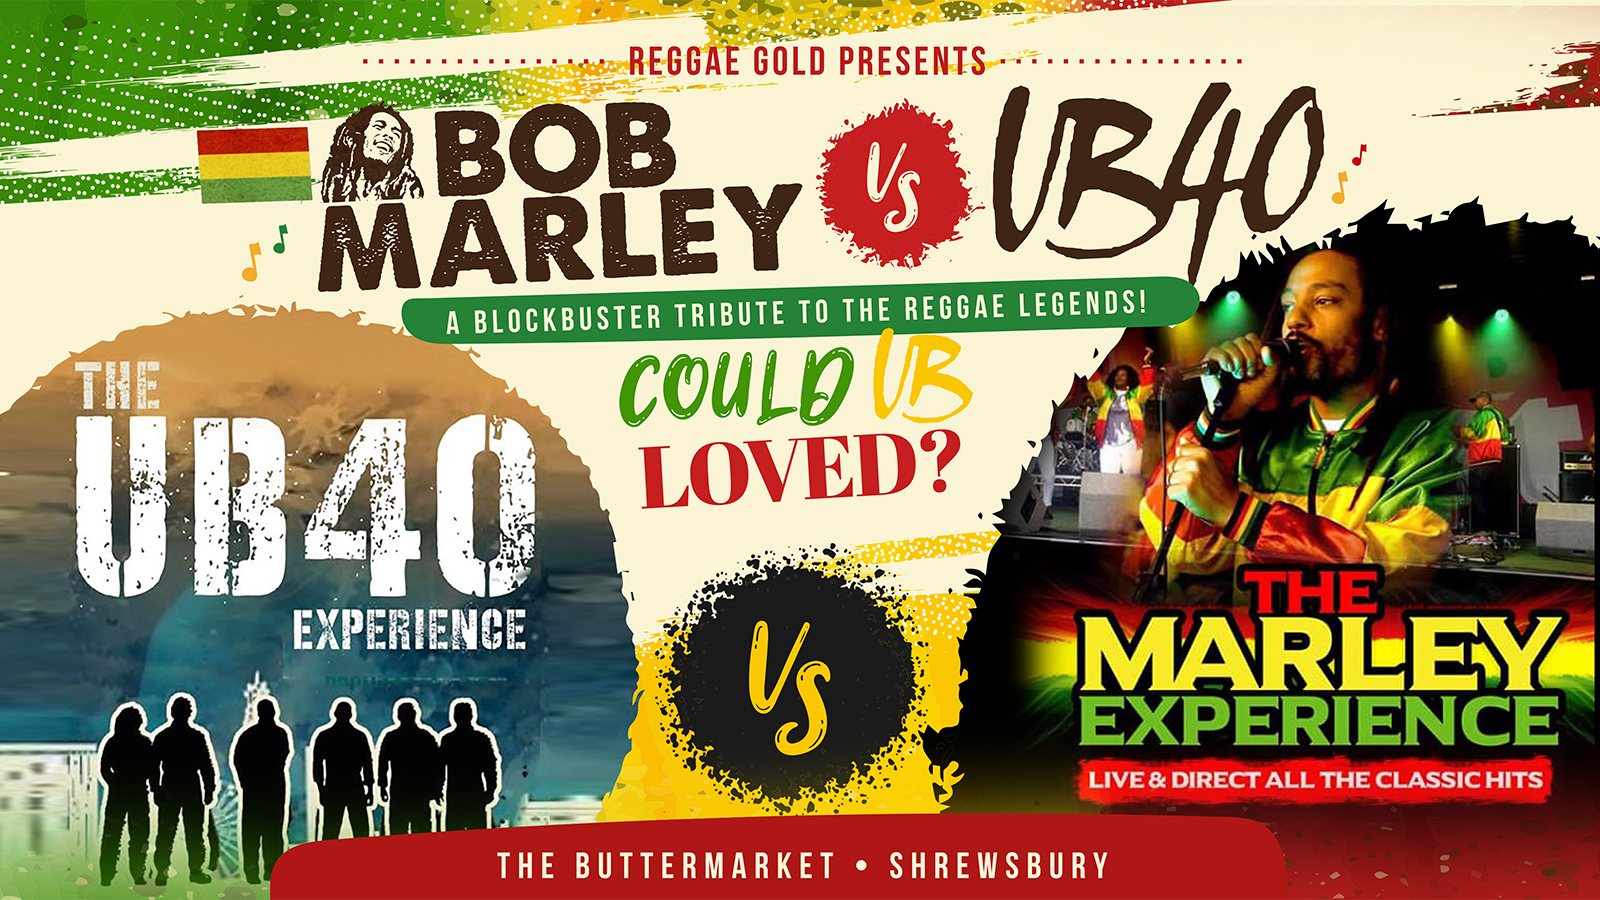 ❤️💛💚 COULD UB LOVED? – Bob Marley VS UB40  ft The Marley Experience + UB40 Experience live!